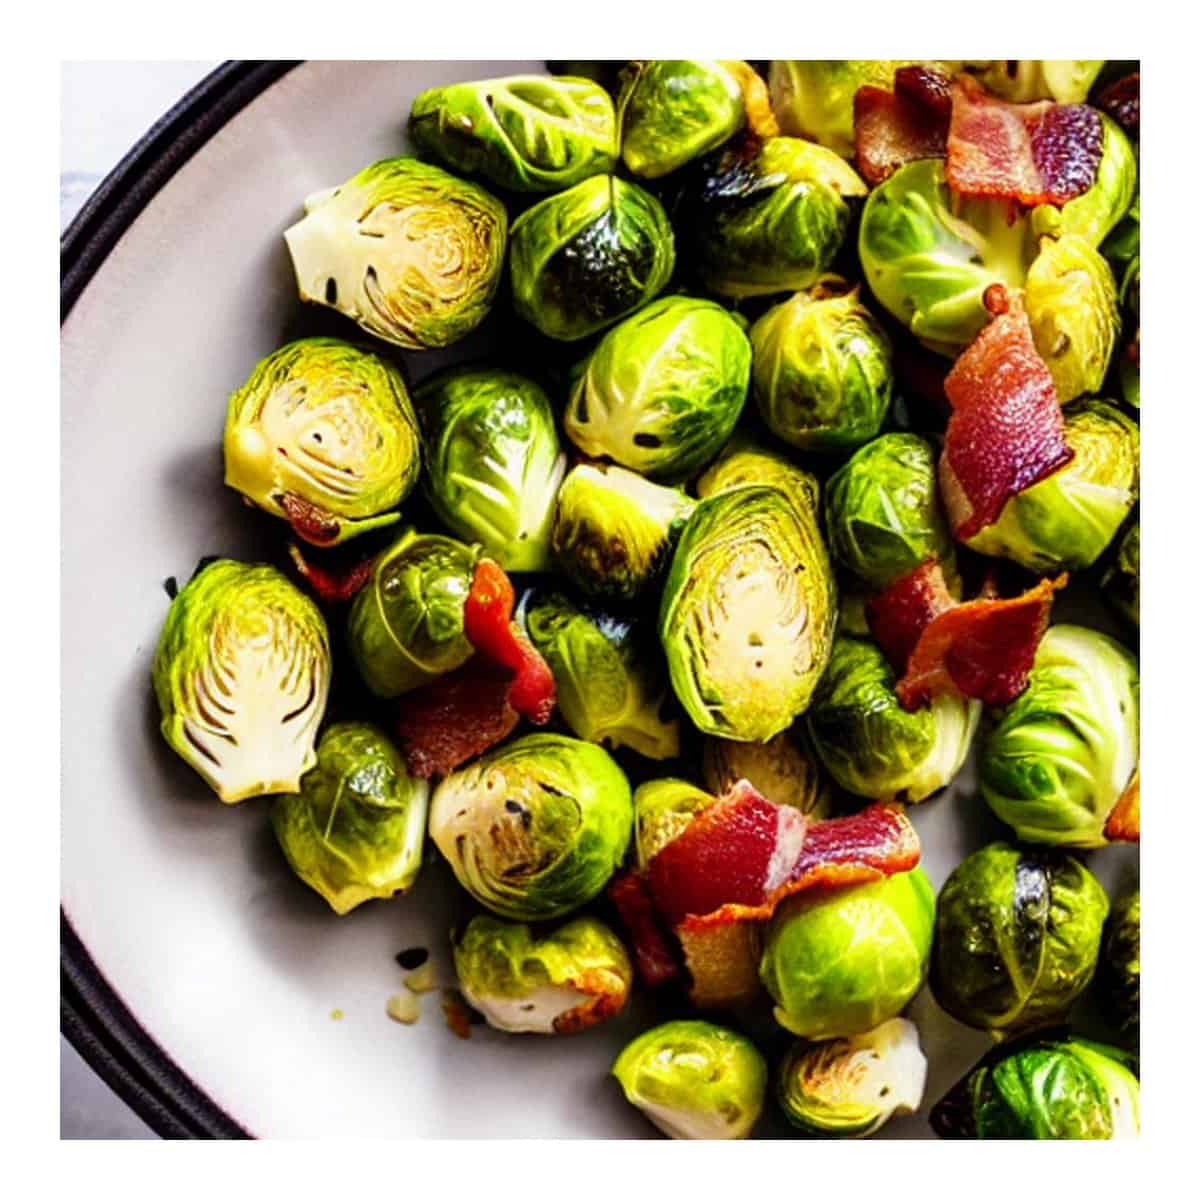 Dijon Mustard Brussel Sprouts With Bacon